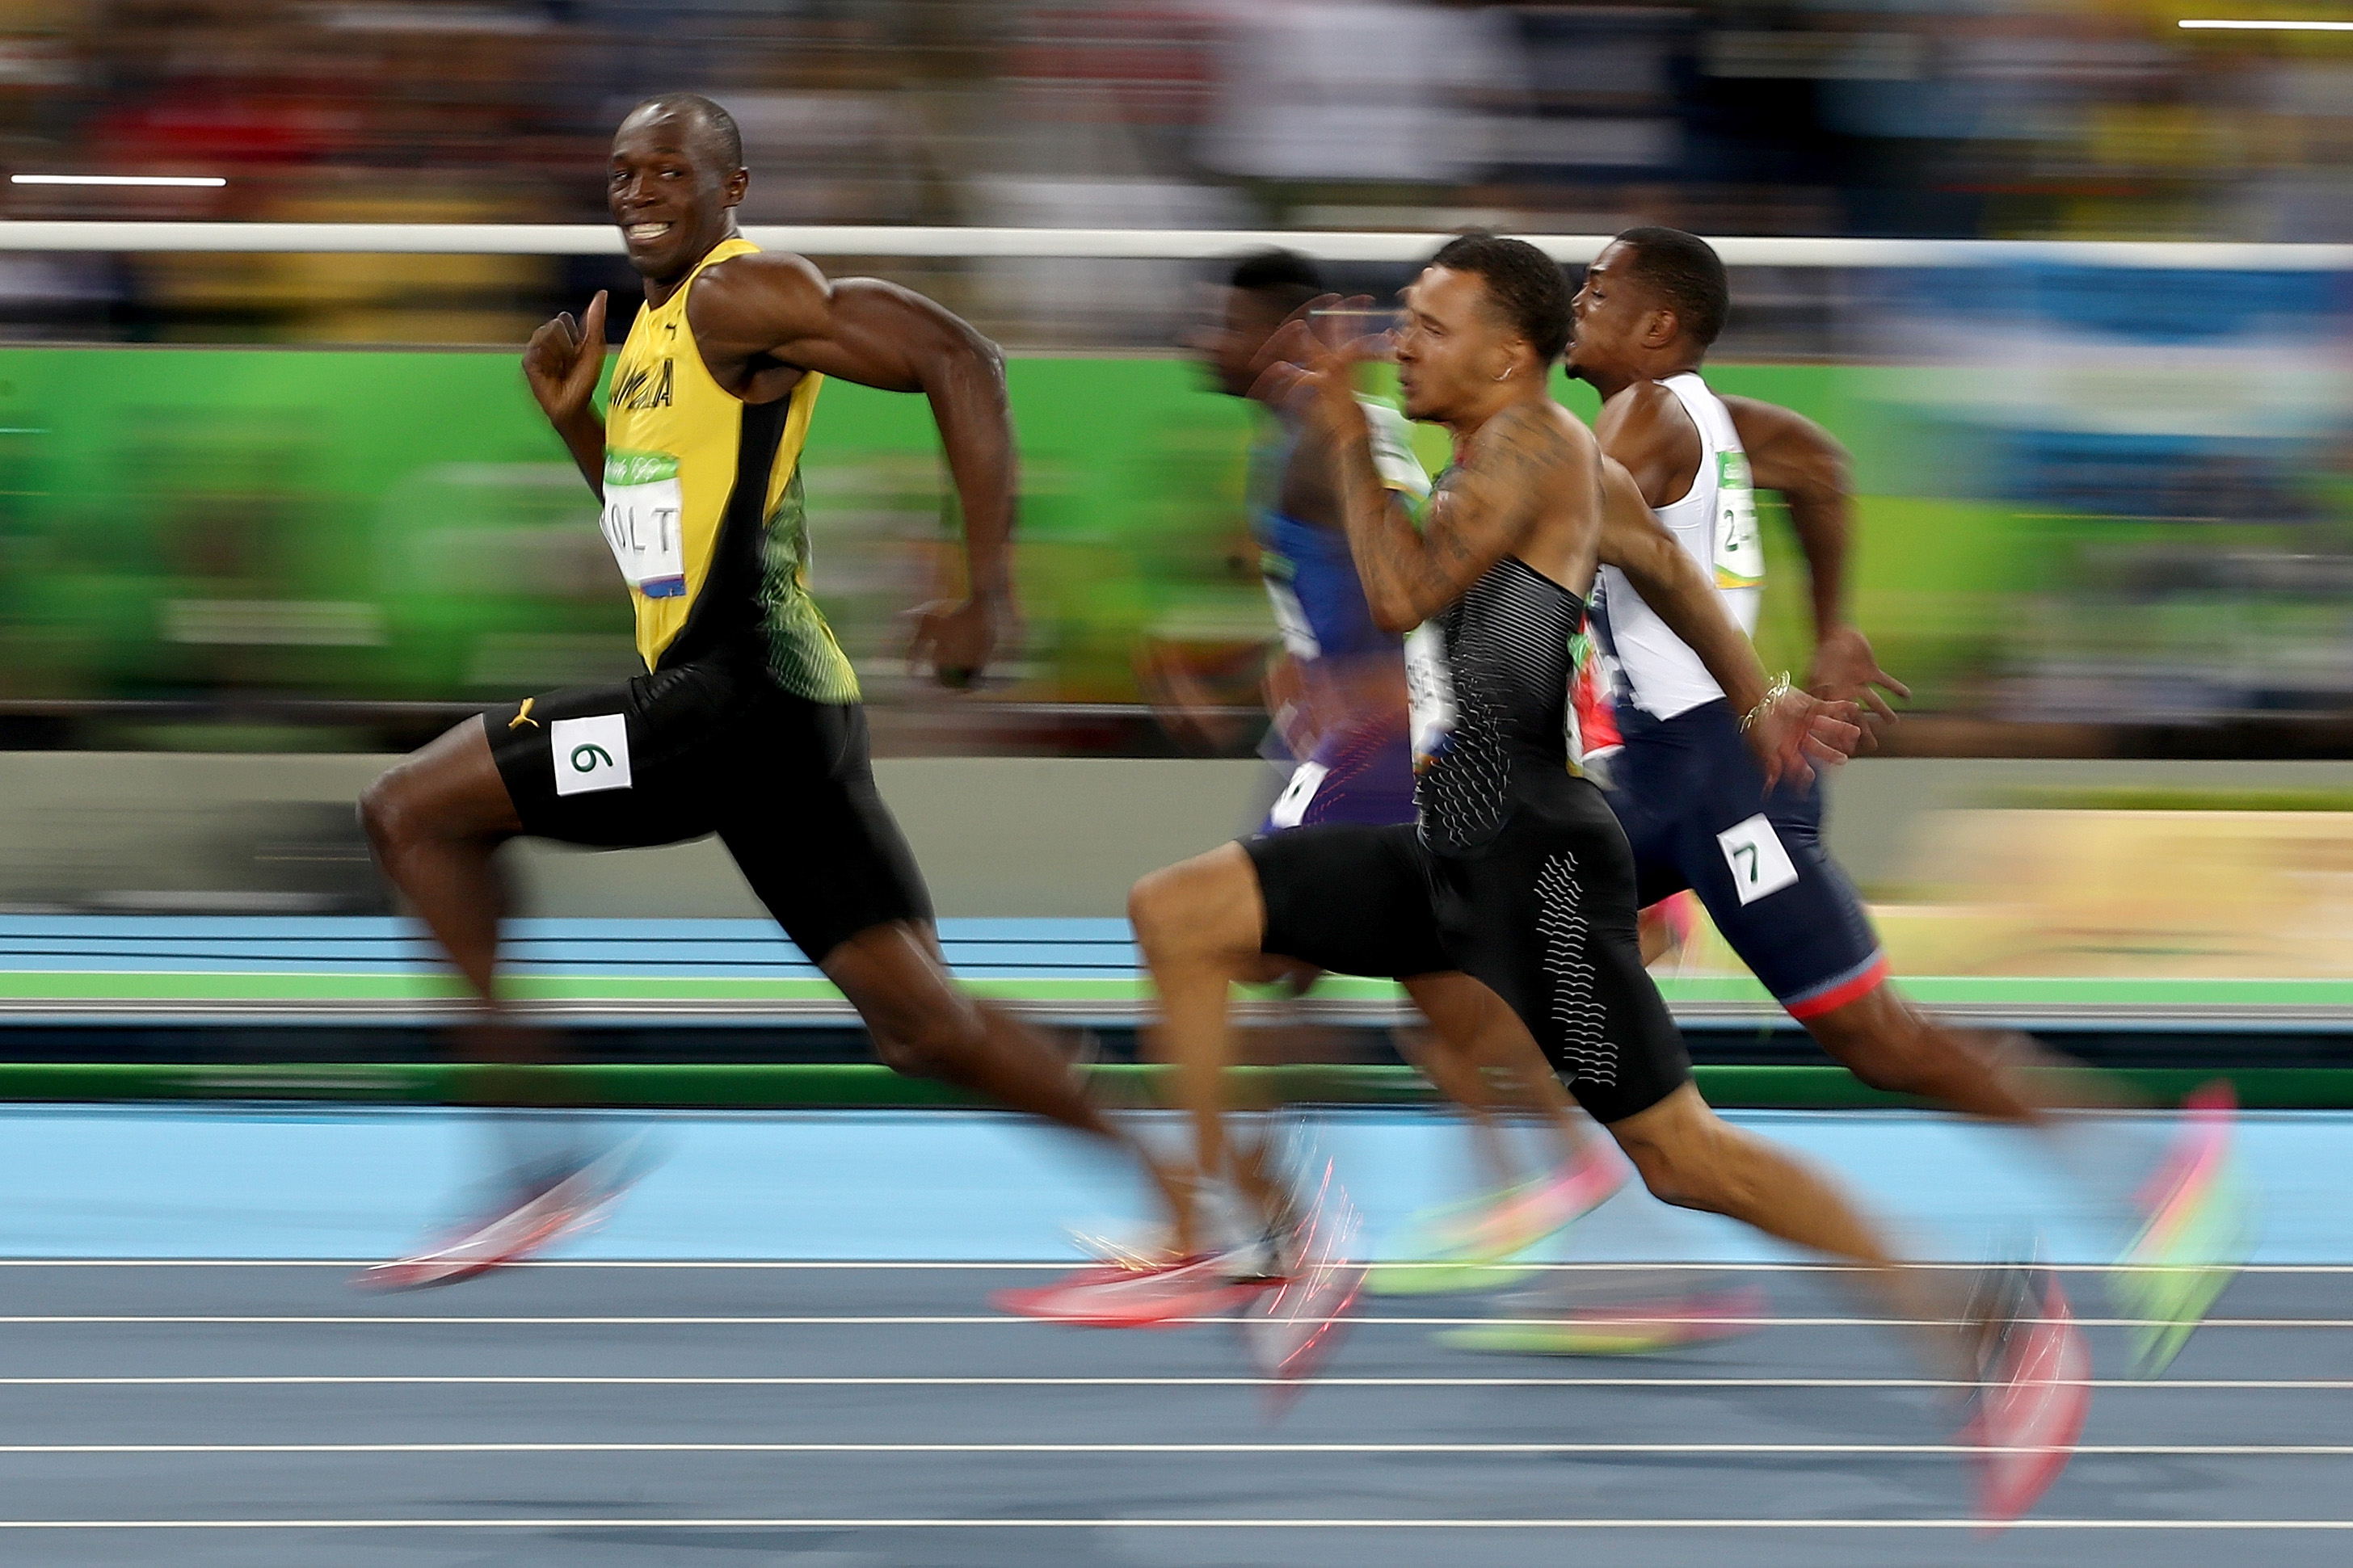 Usain Bolt of Jamaica competes in the Men's 100 meter semifinal on Day 9 of the Rio 2016 Olympic Games in Rio de Janeiro on Aug.14, 2016. (Cameron Spencer—Getty Images)